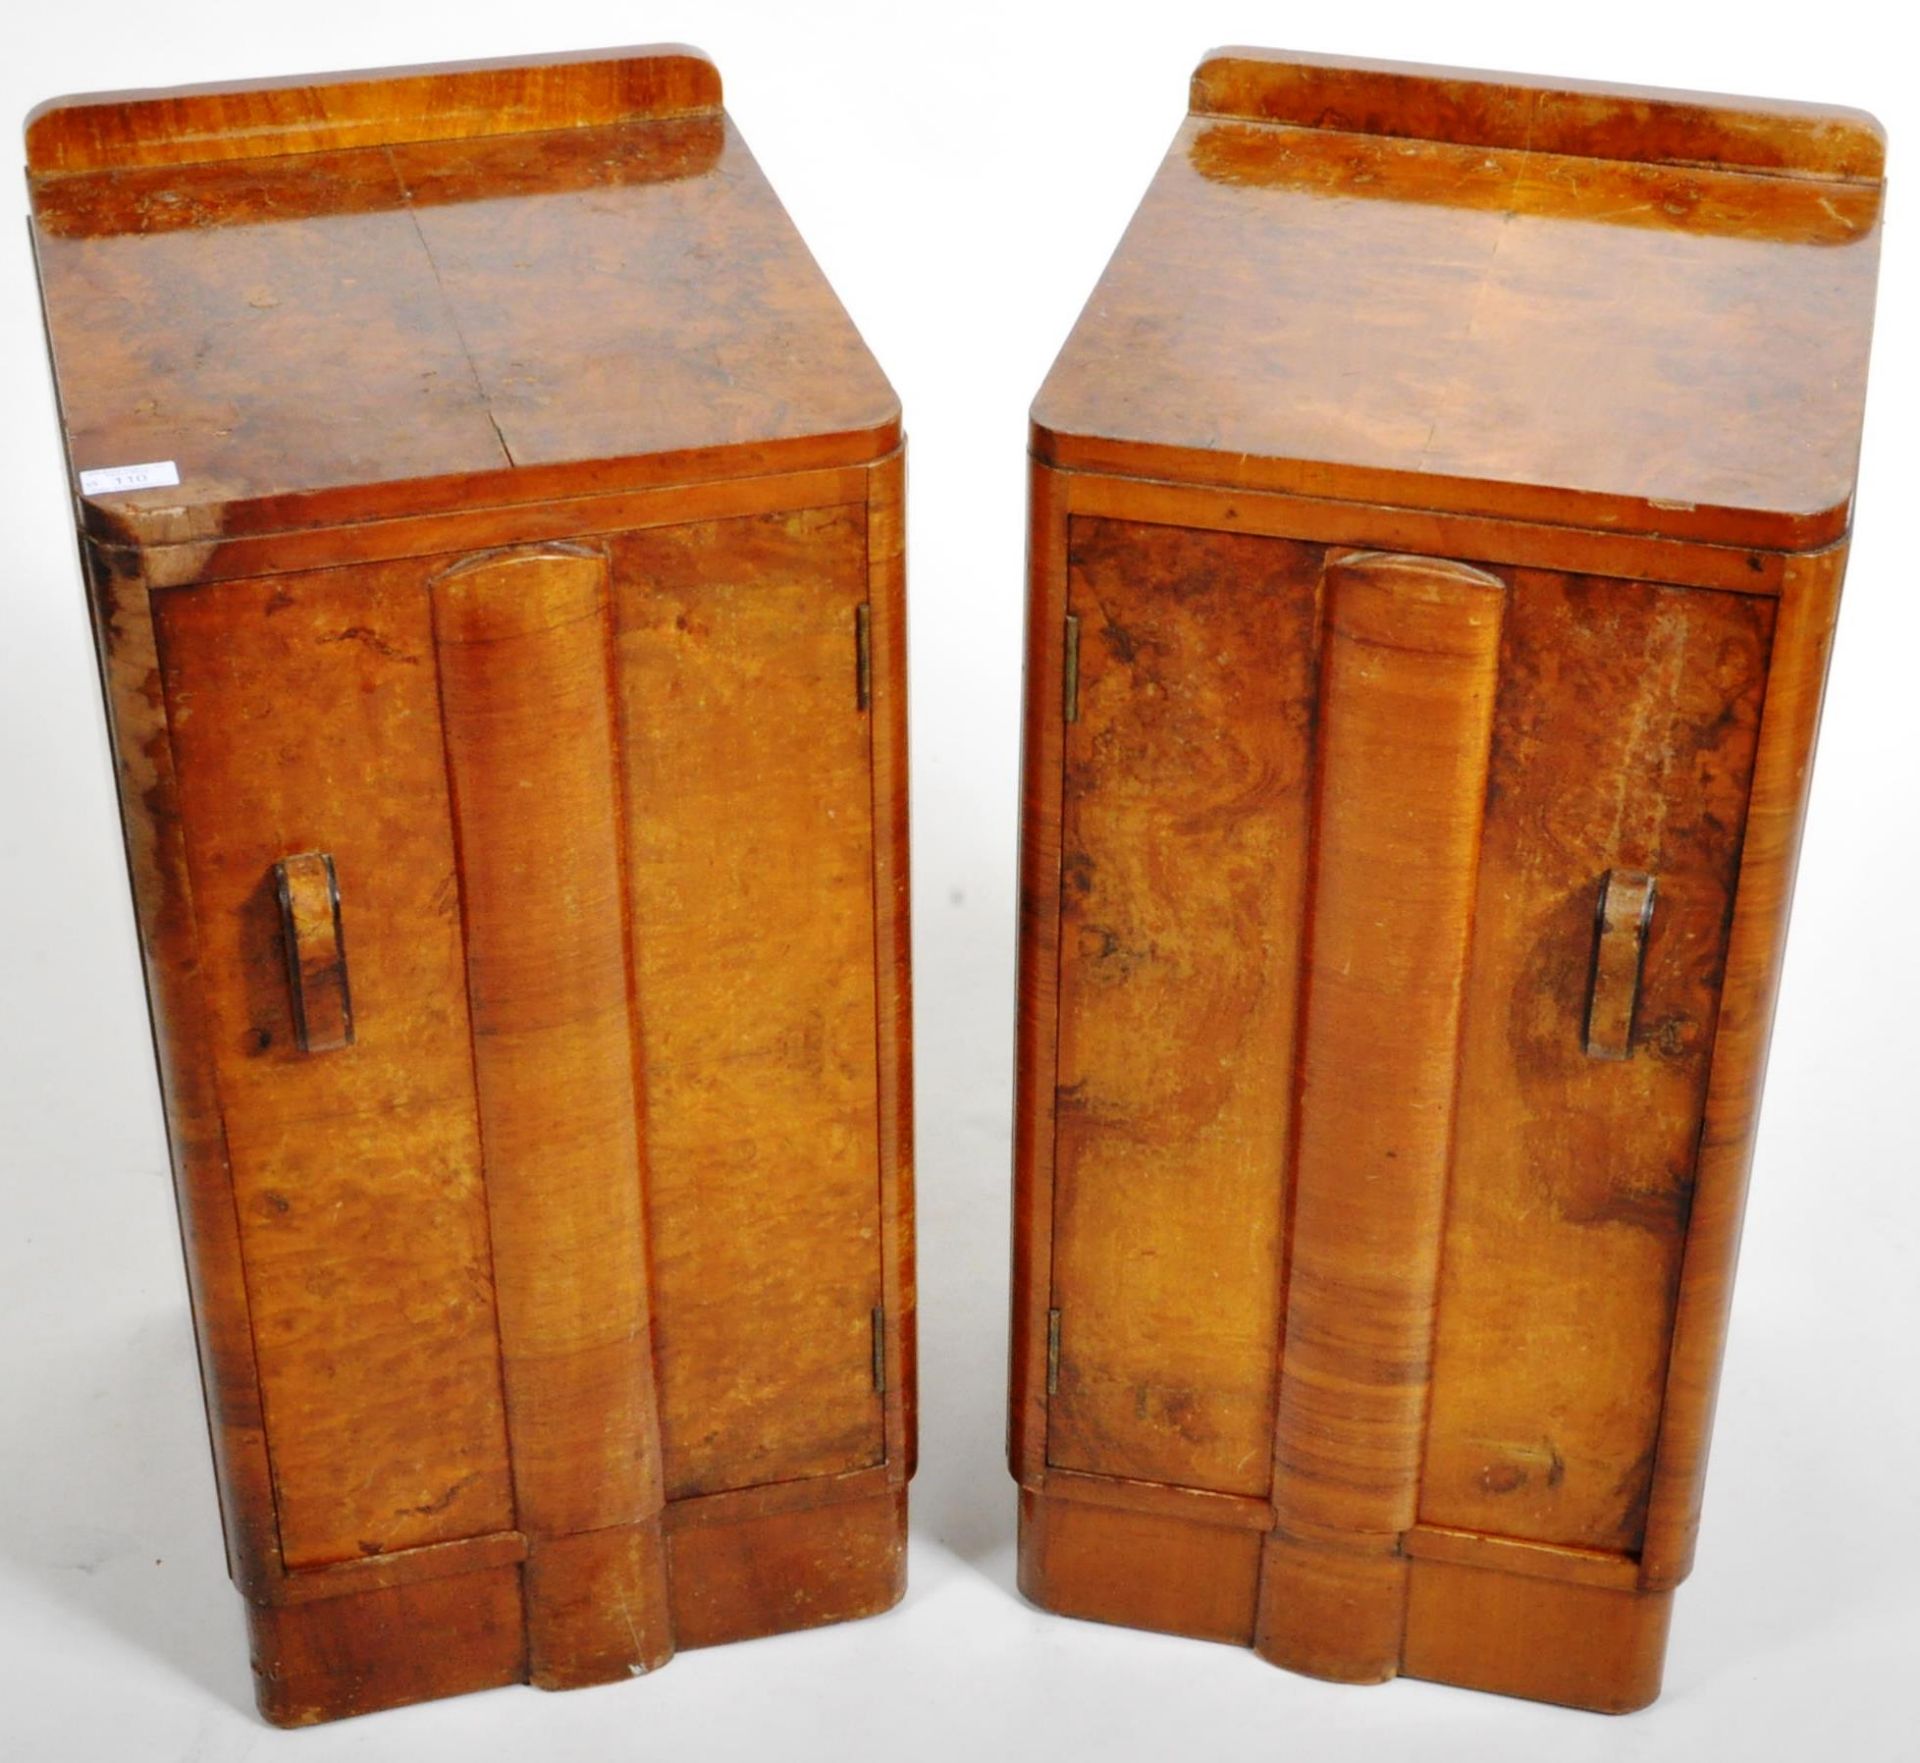 PAIR OF 1930S ART DECO WALNUT BEDSIDE TABLE CUPBOARDS - Image 2 of 7